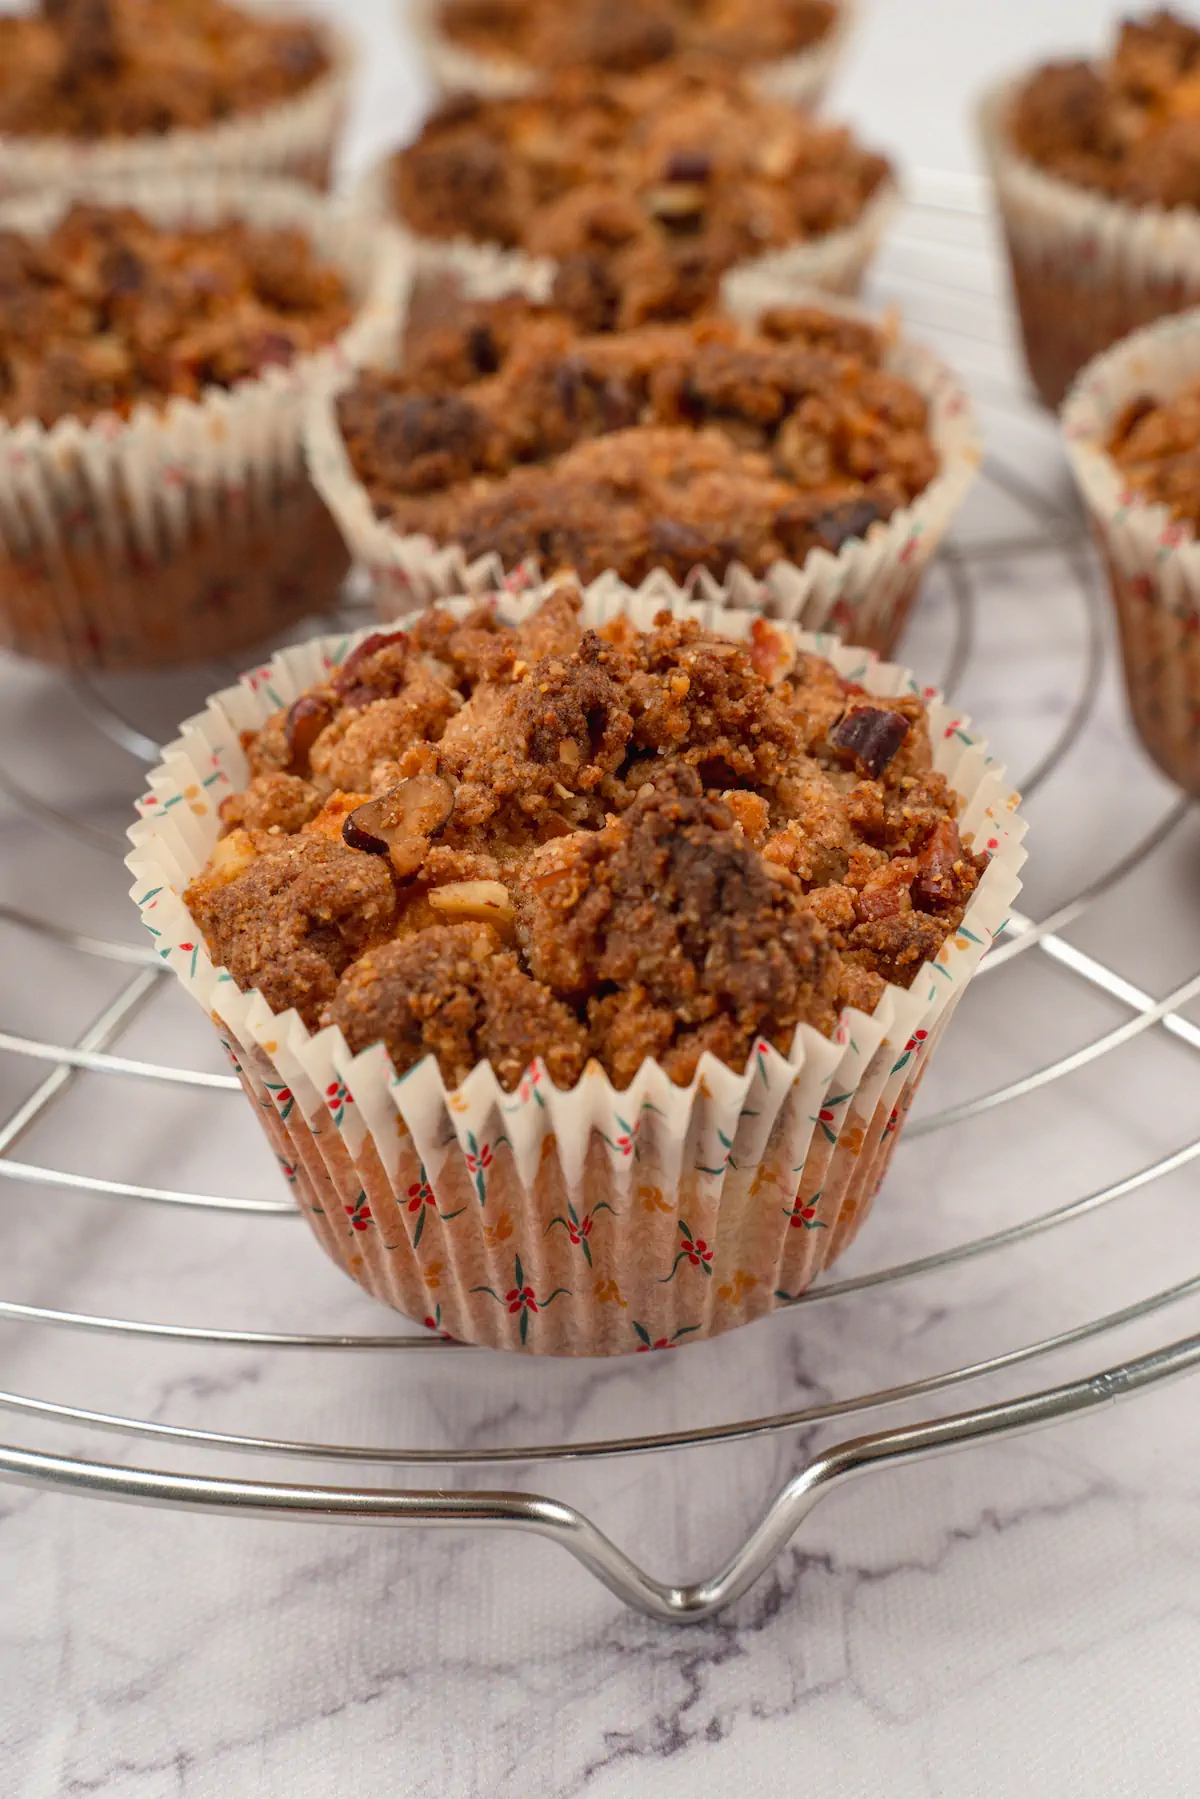 A close-up photo of homemade sugar-free almond flour muffins amid other similar muffins.